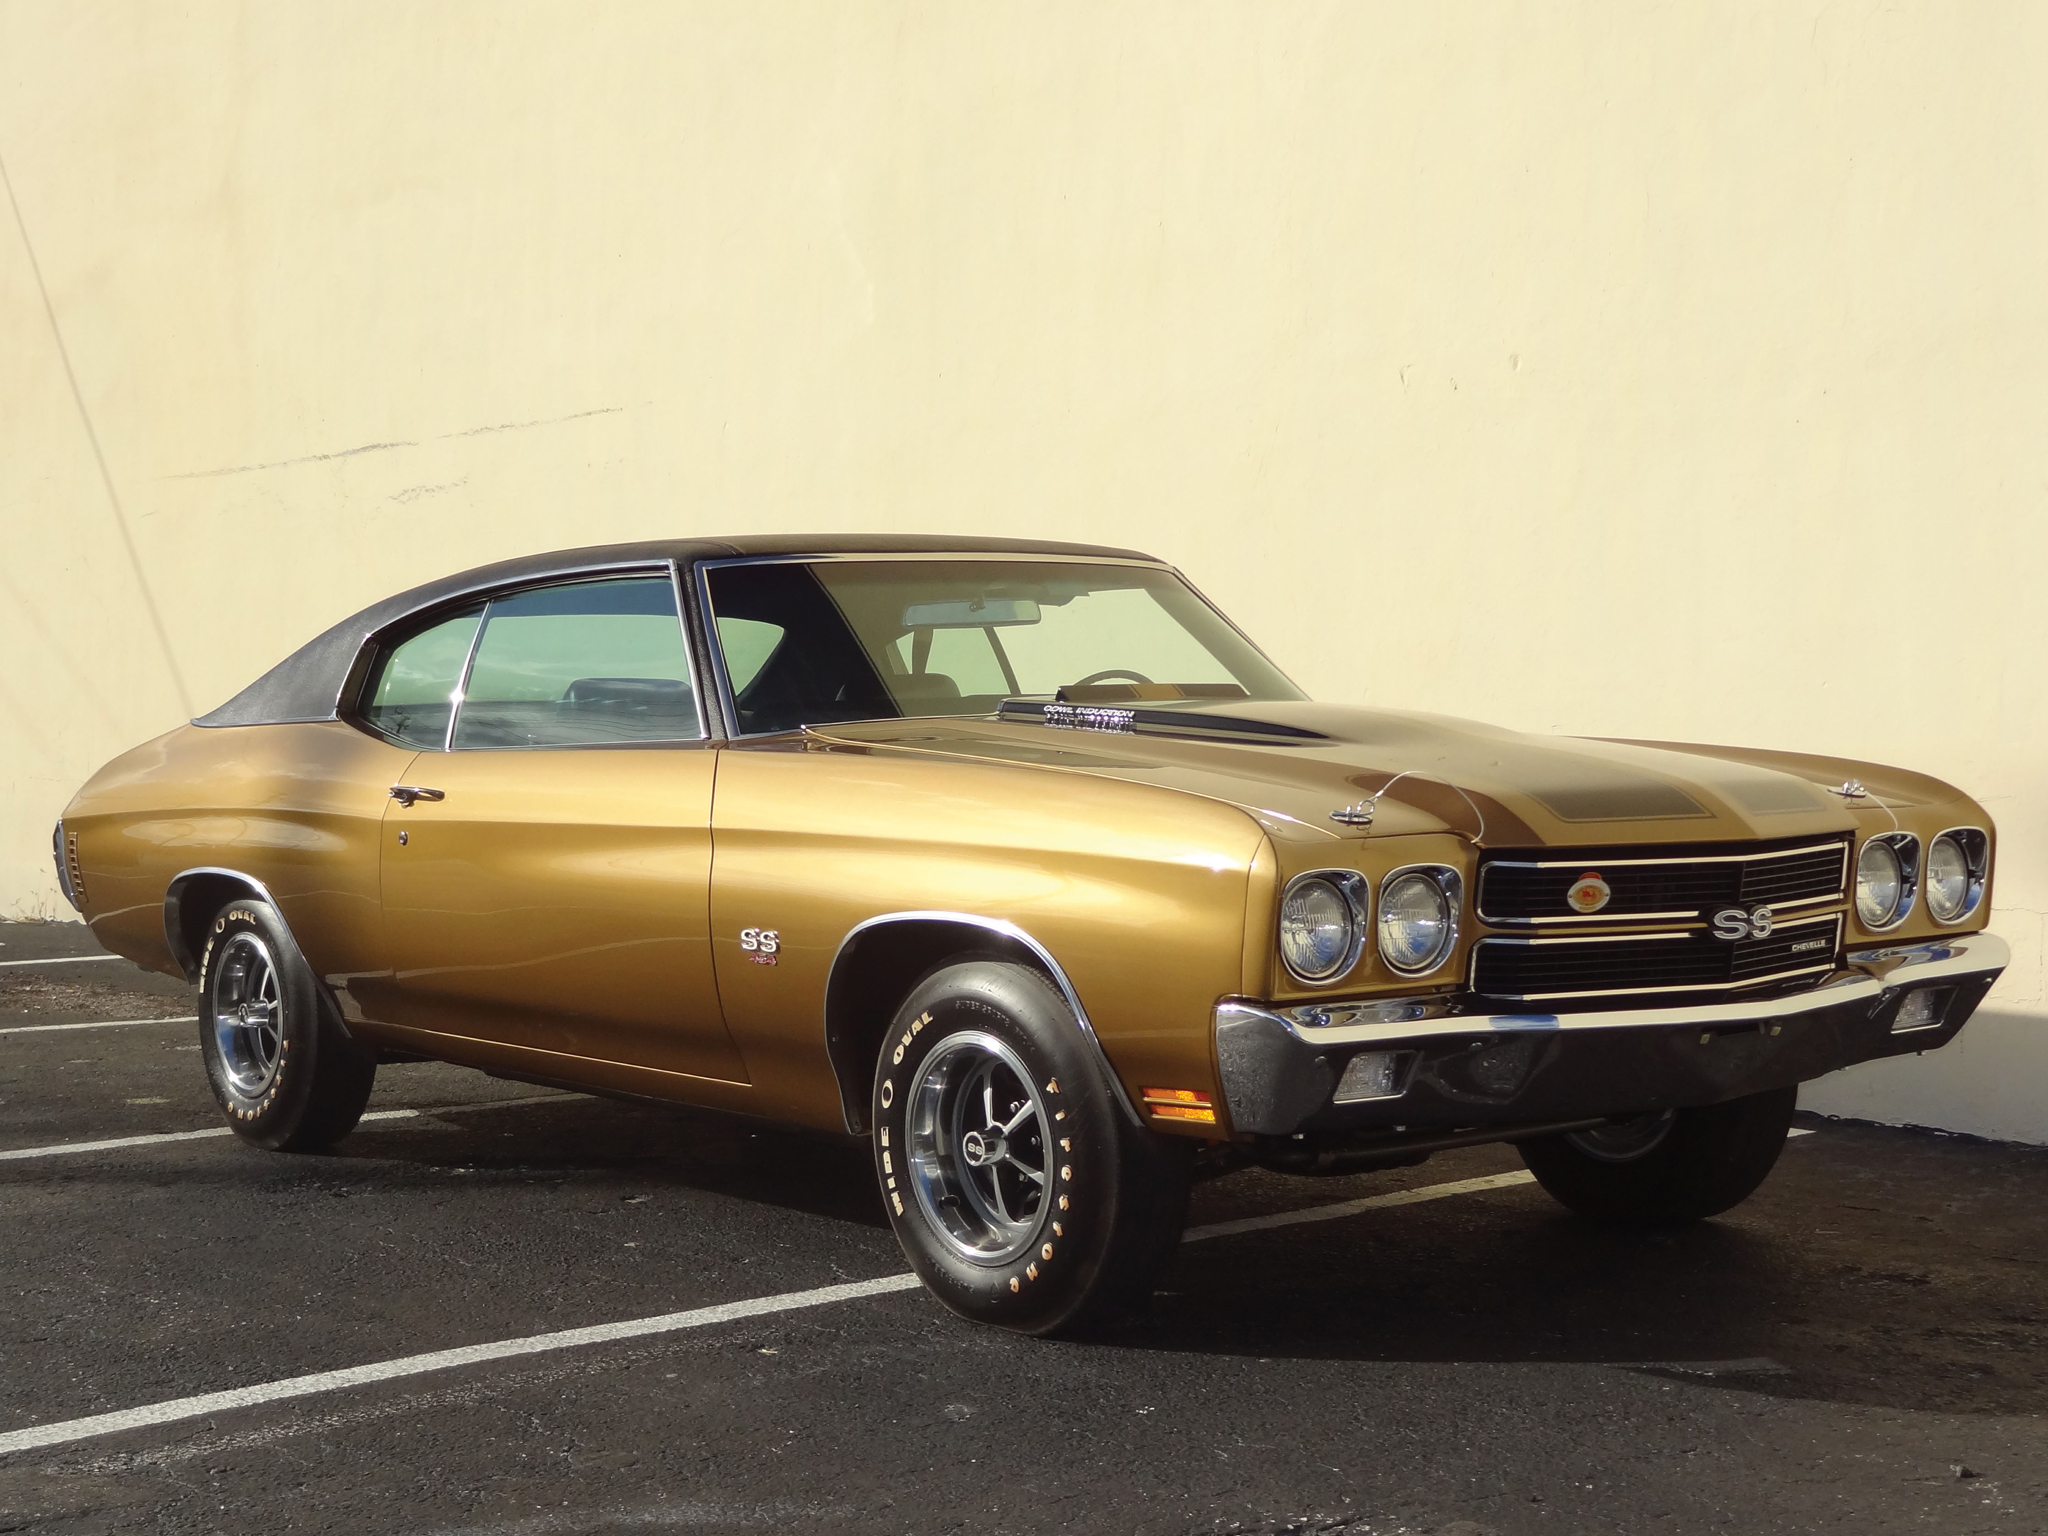 Chevrolet Chevelle SS Backgrounds on Wallpapers Vista